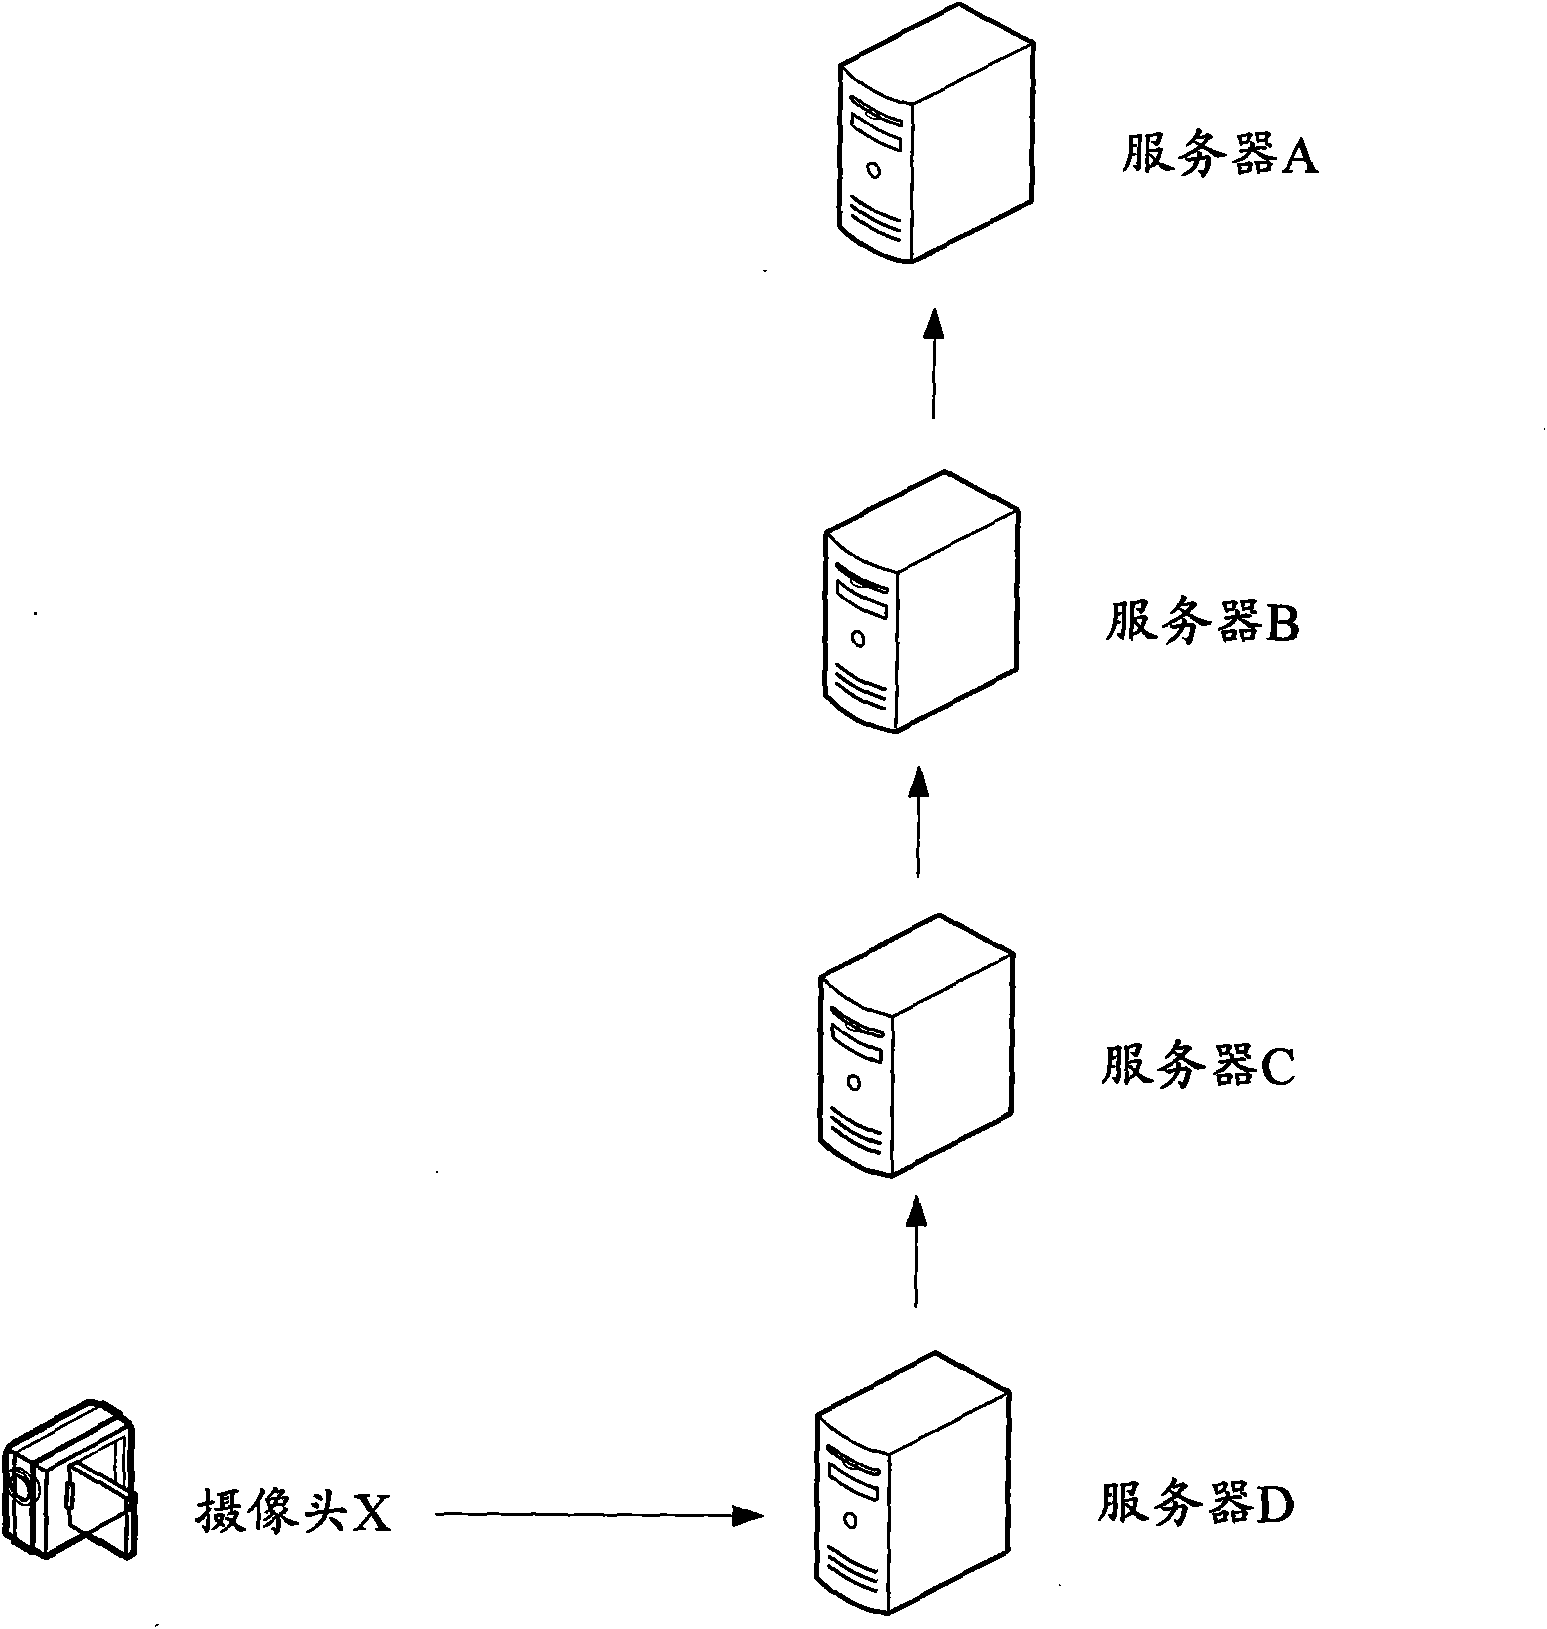 Method and equipment for managing monitoring equipment